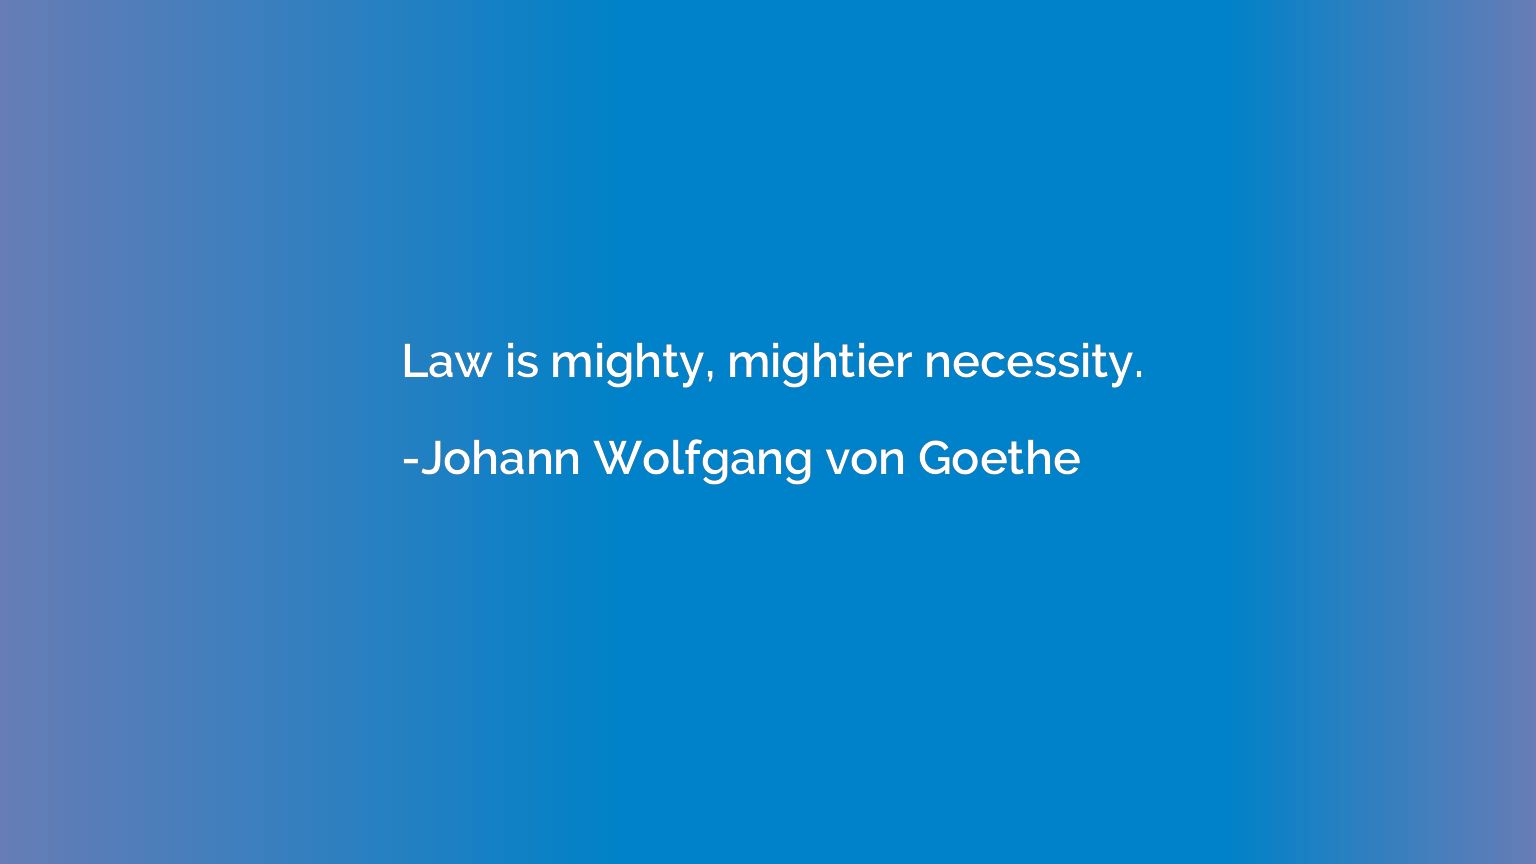 Law is mighty, mightier necessity.